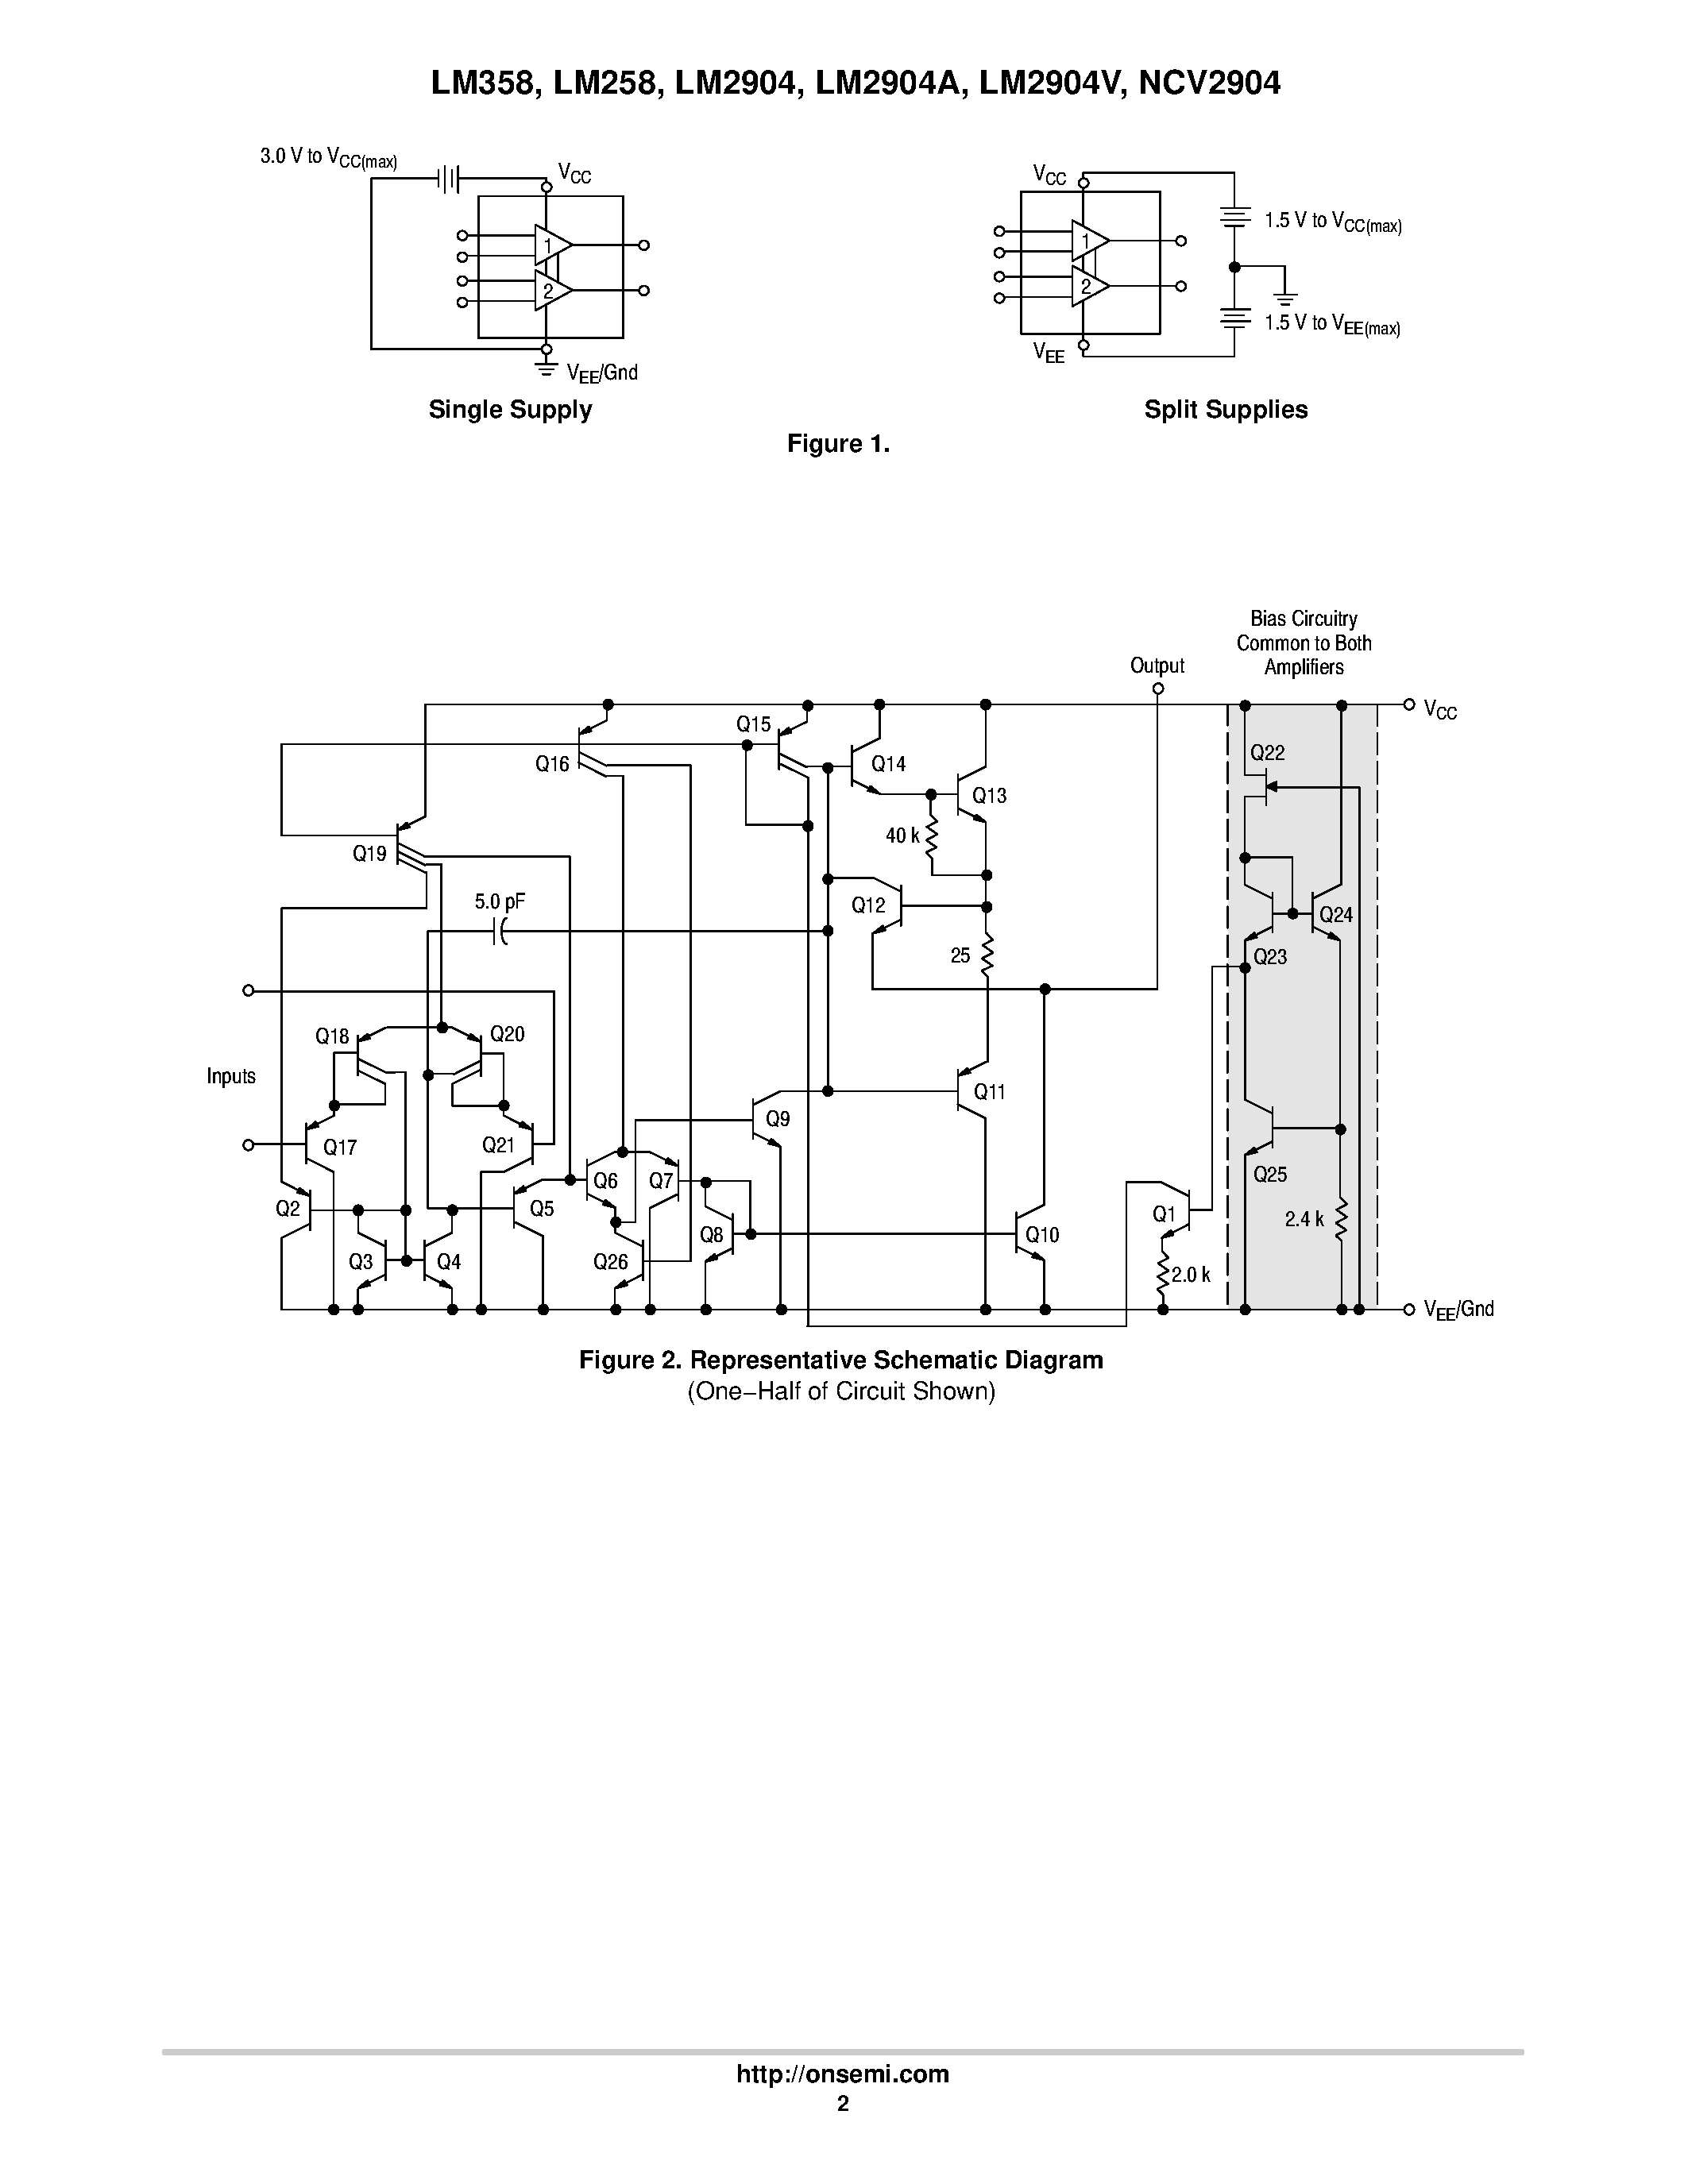 Datasheet LM2904 - Single Supply Dual Operational Amplifiers page 2